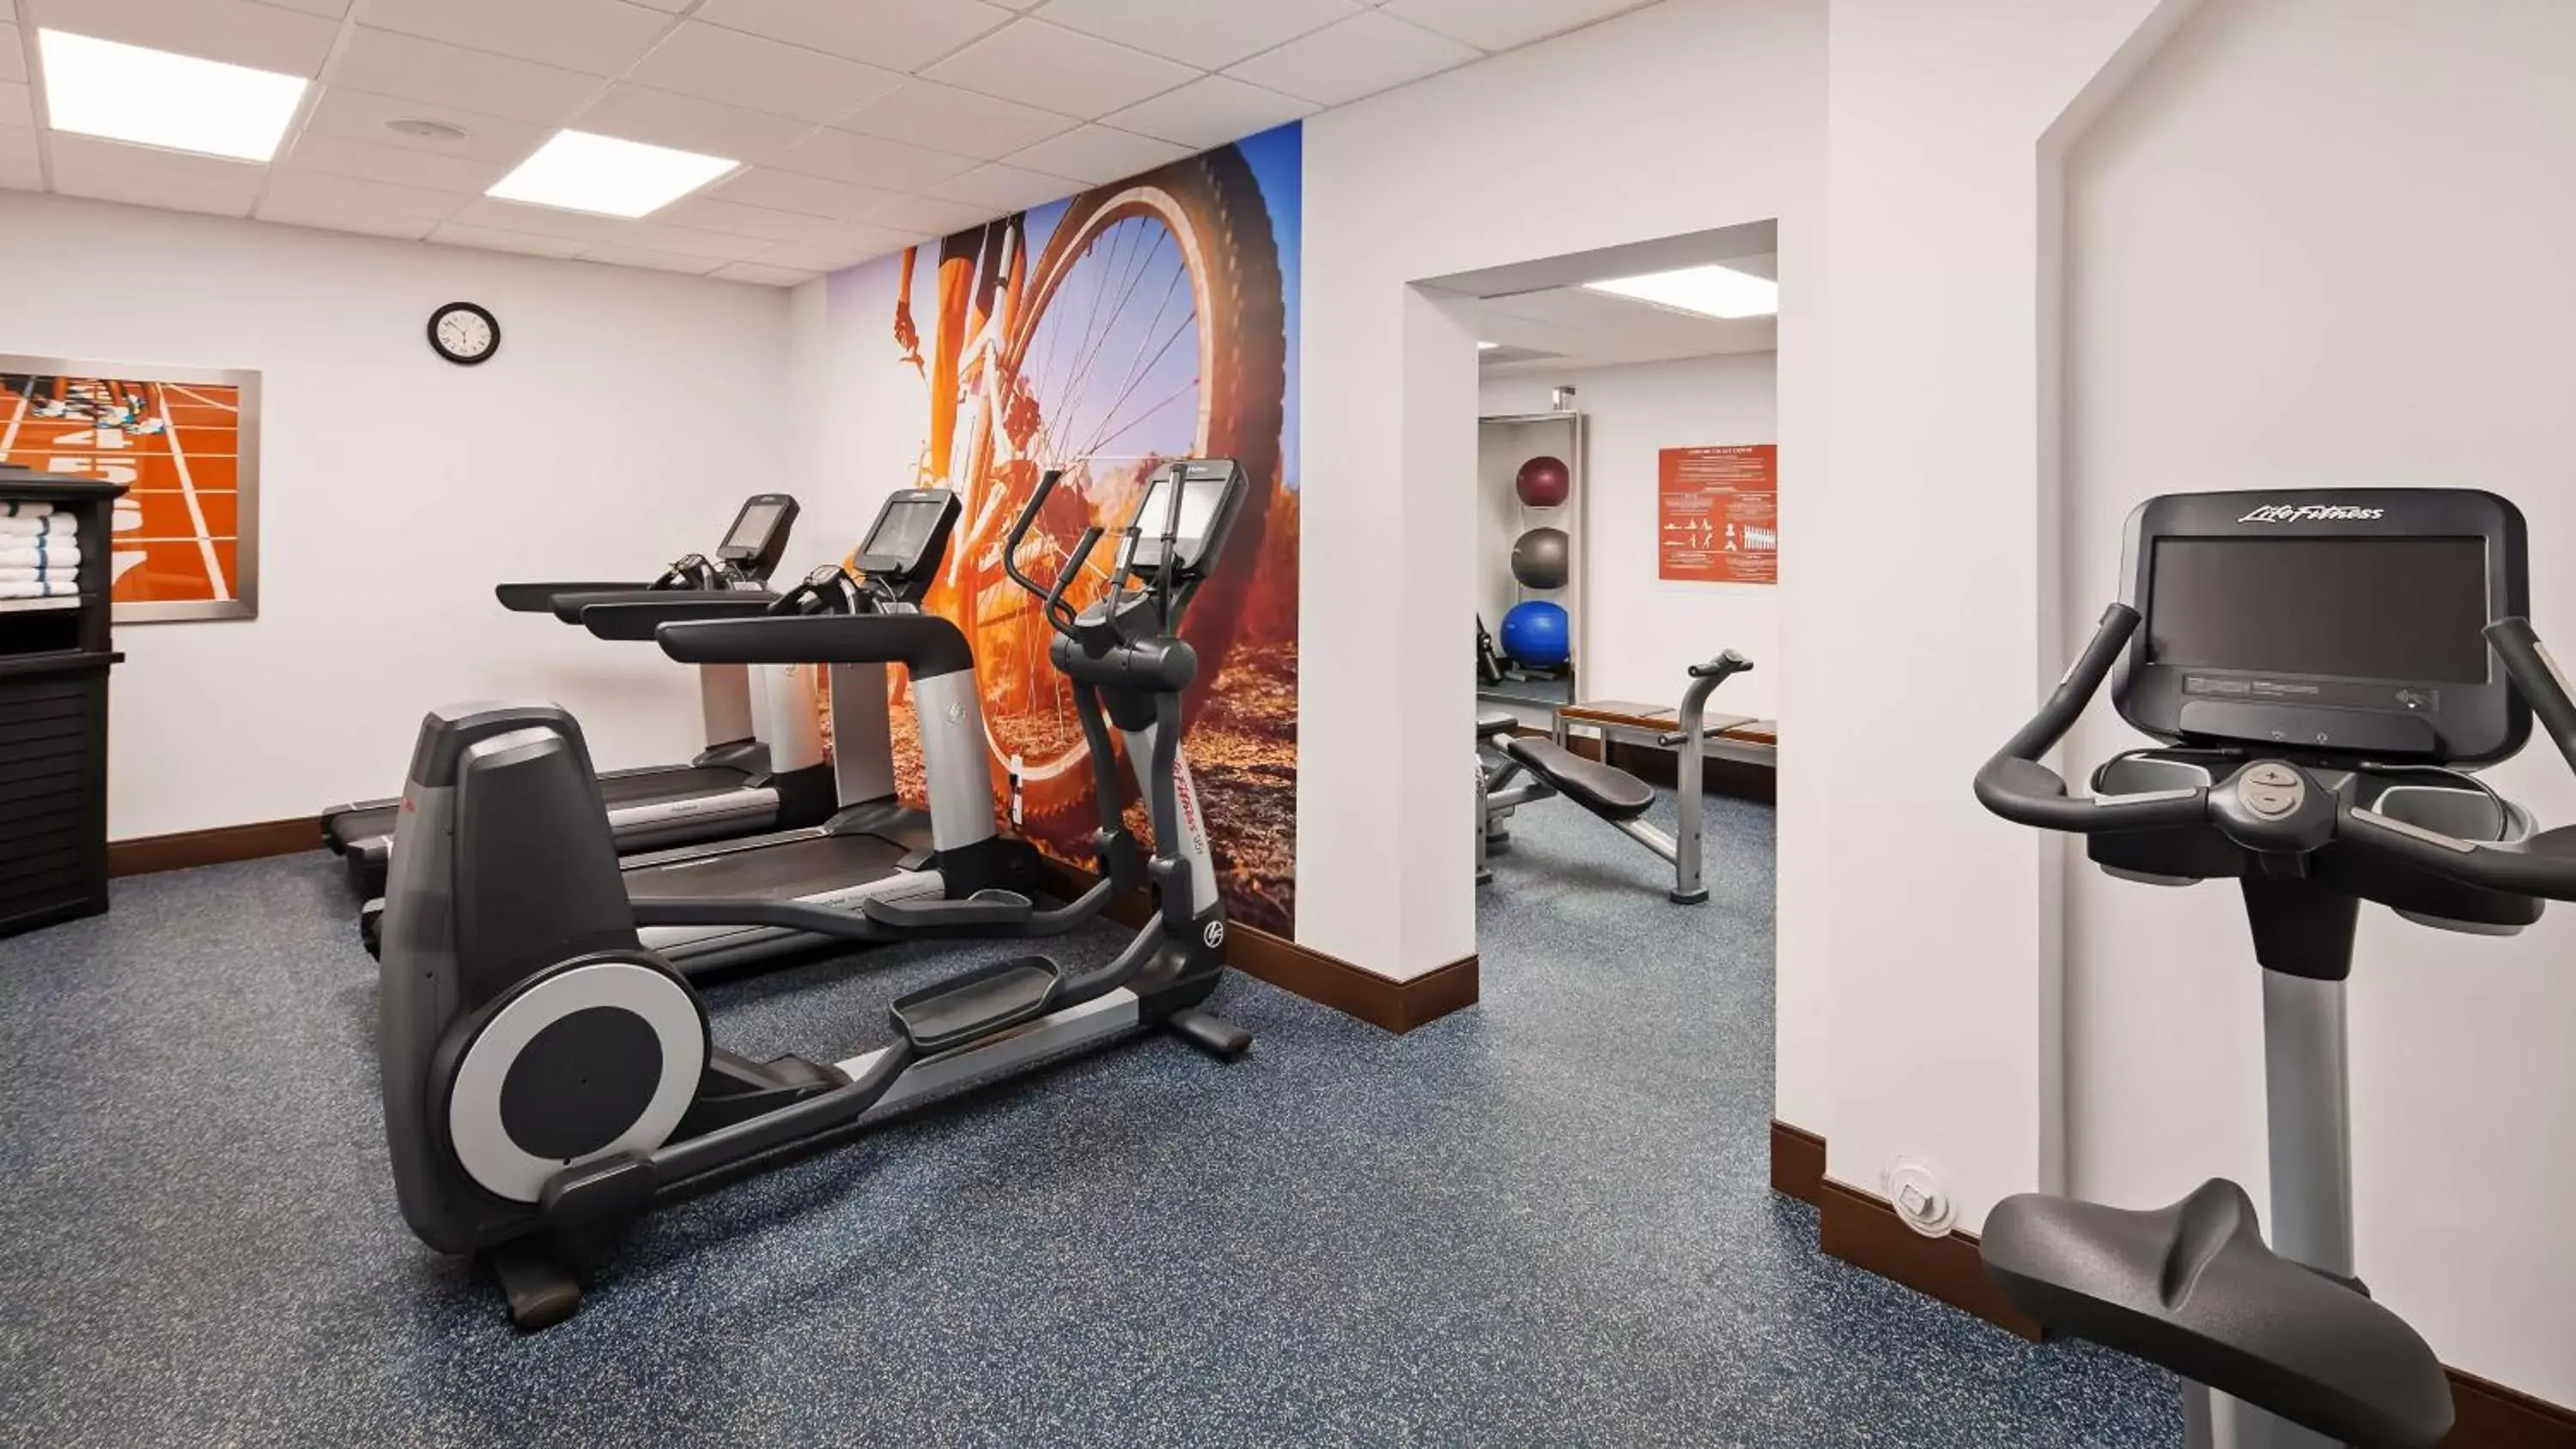 Fitness centre/facilities, Fitness Center/Facilities in Best Western Premier Kansas City Sports Complex Hotel